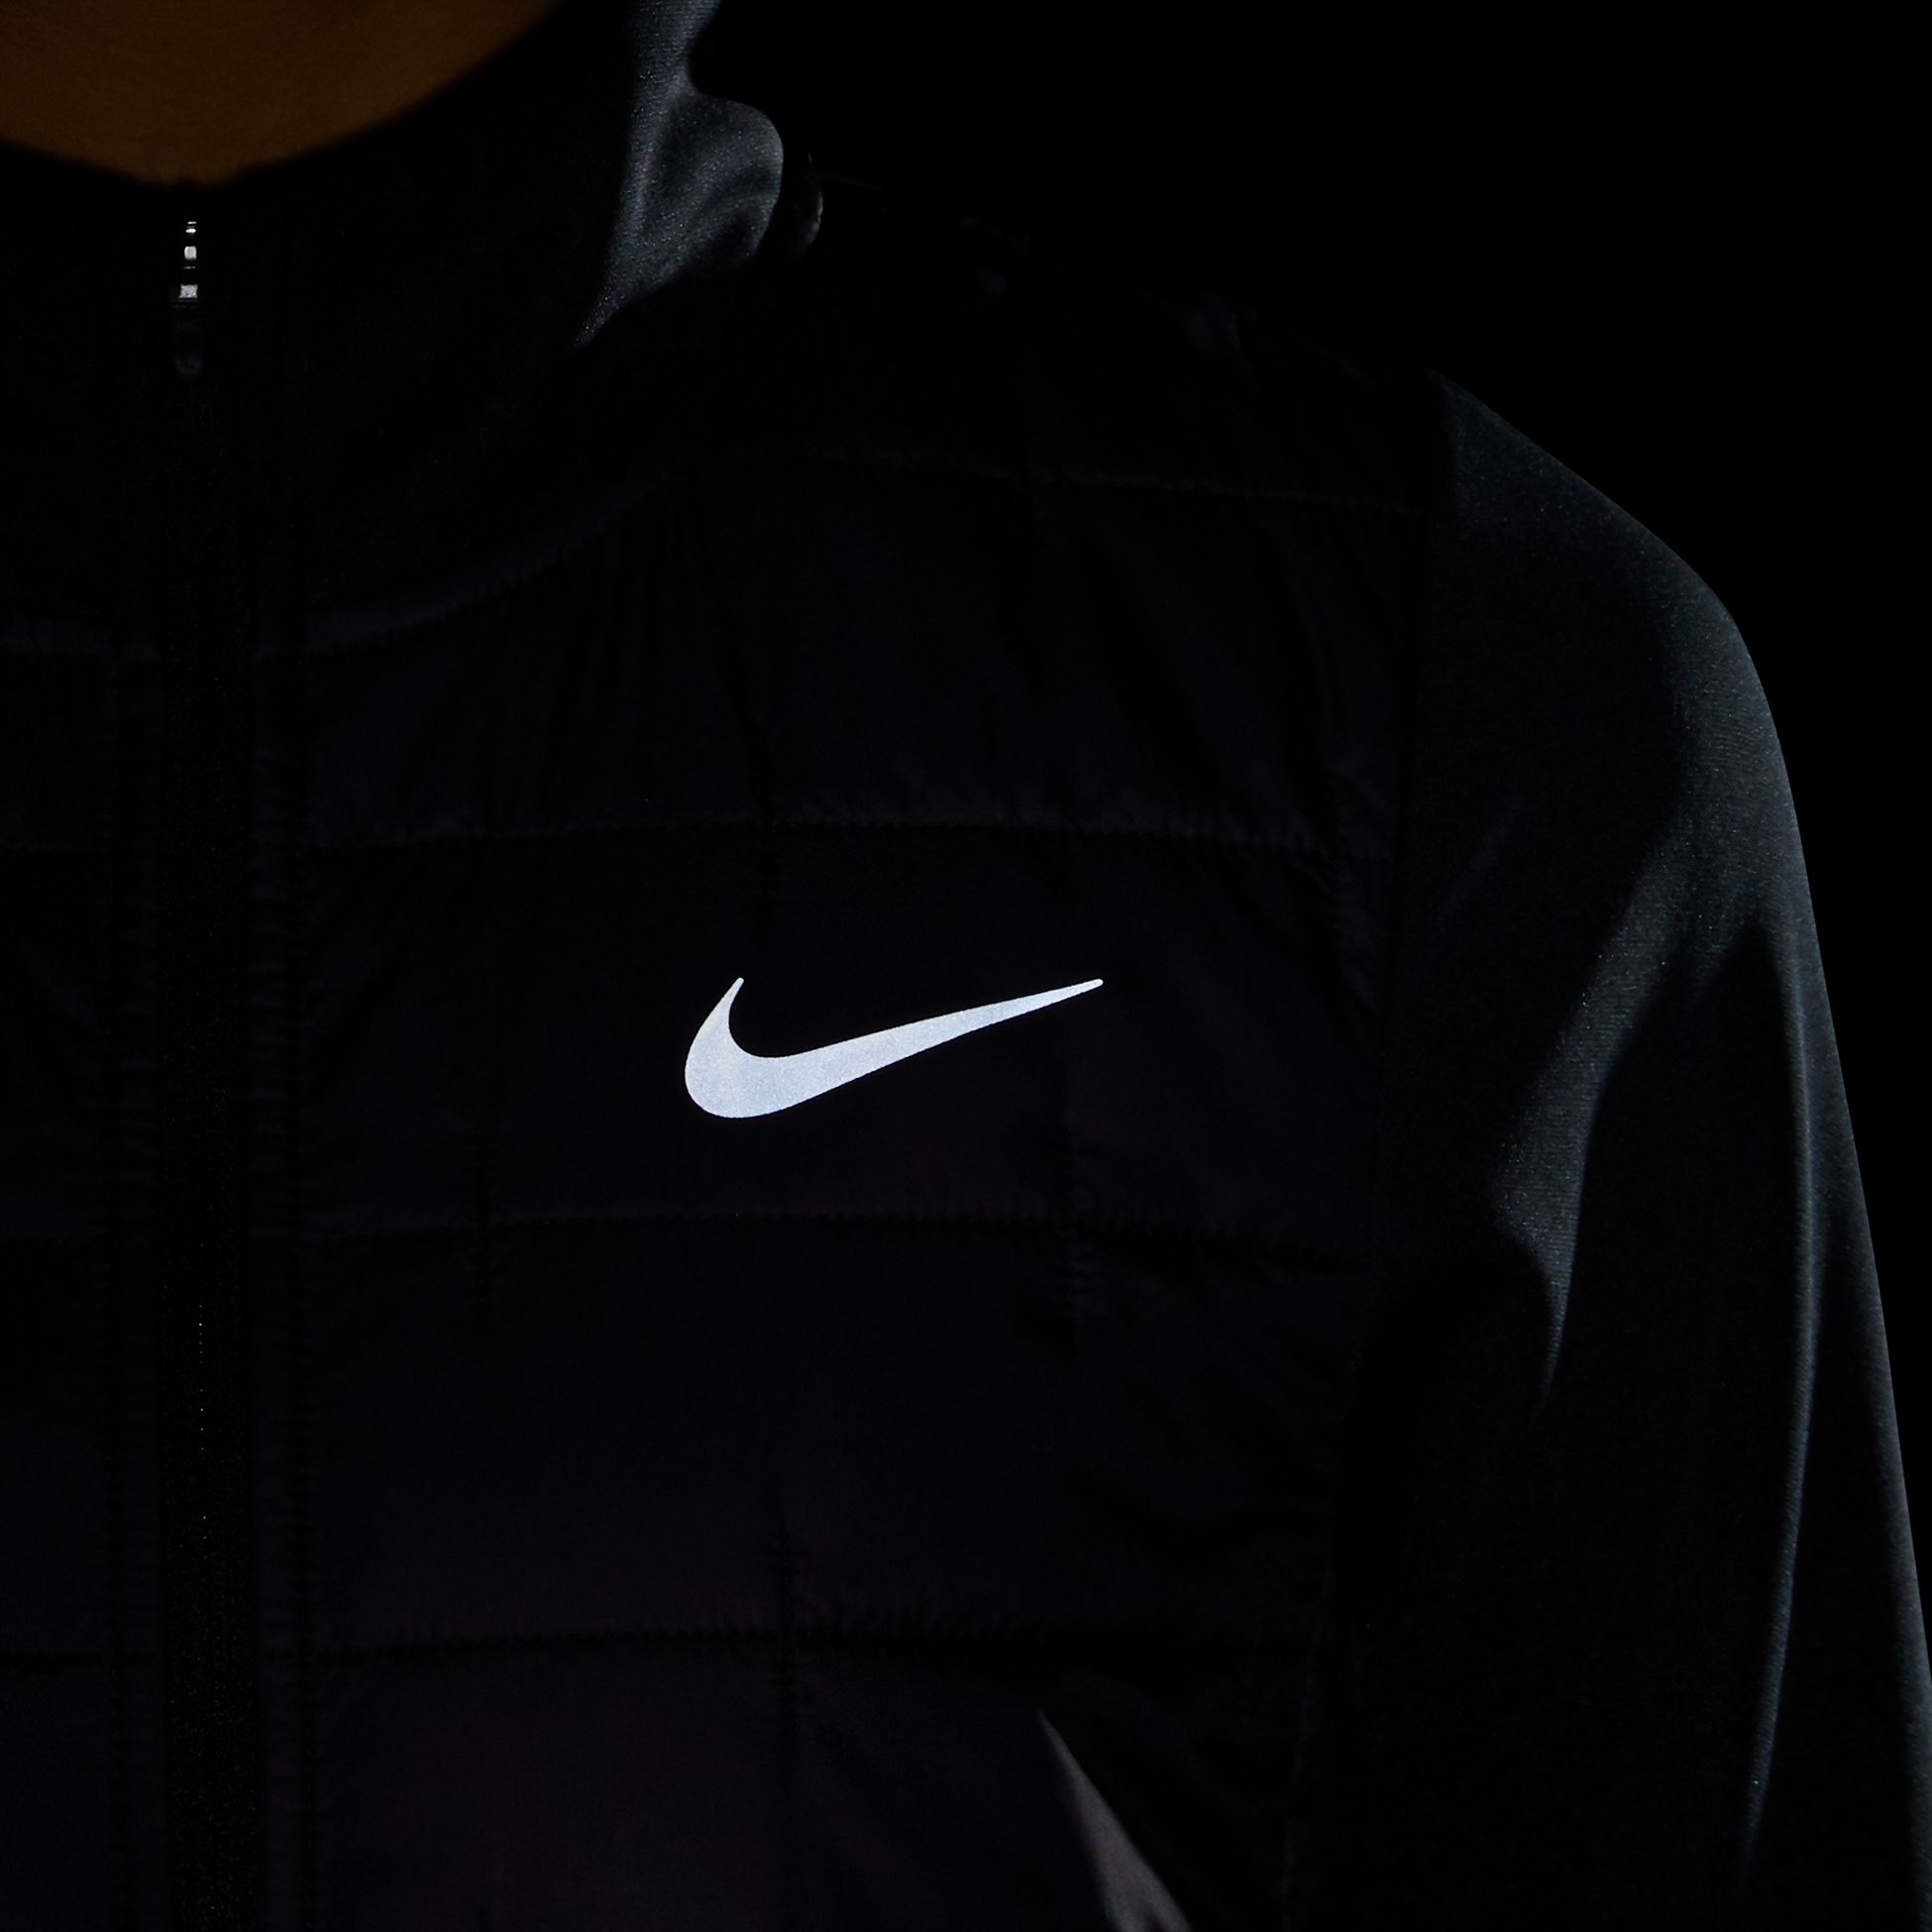 NIKE, W NK THERMA-FIT JKT